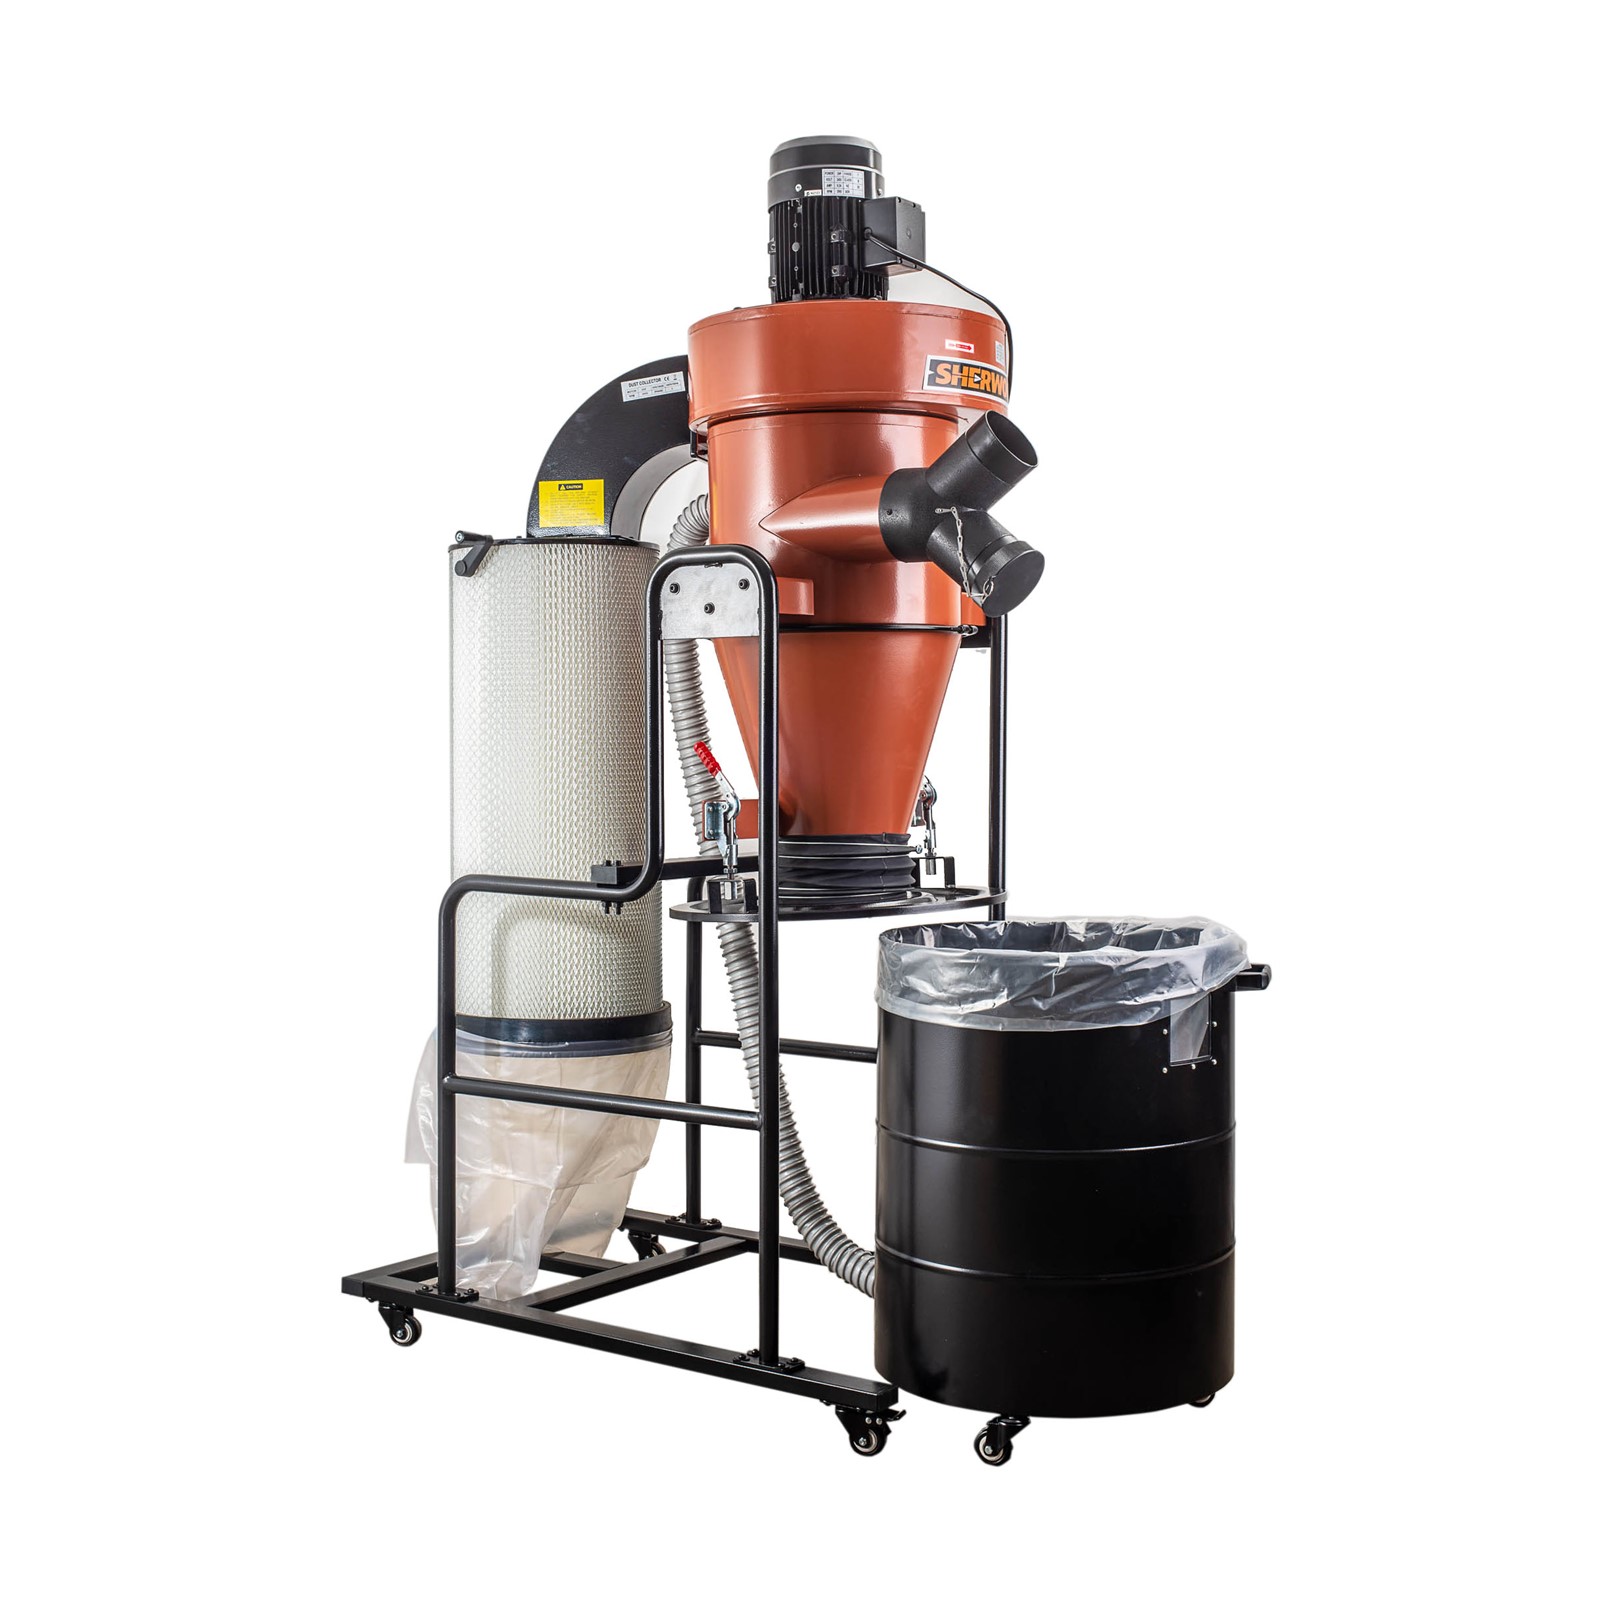 DUST Commander DLX ESD MKII – Professional Cyclone Dust Extractor